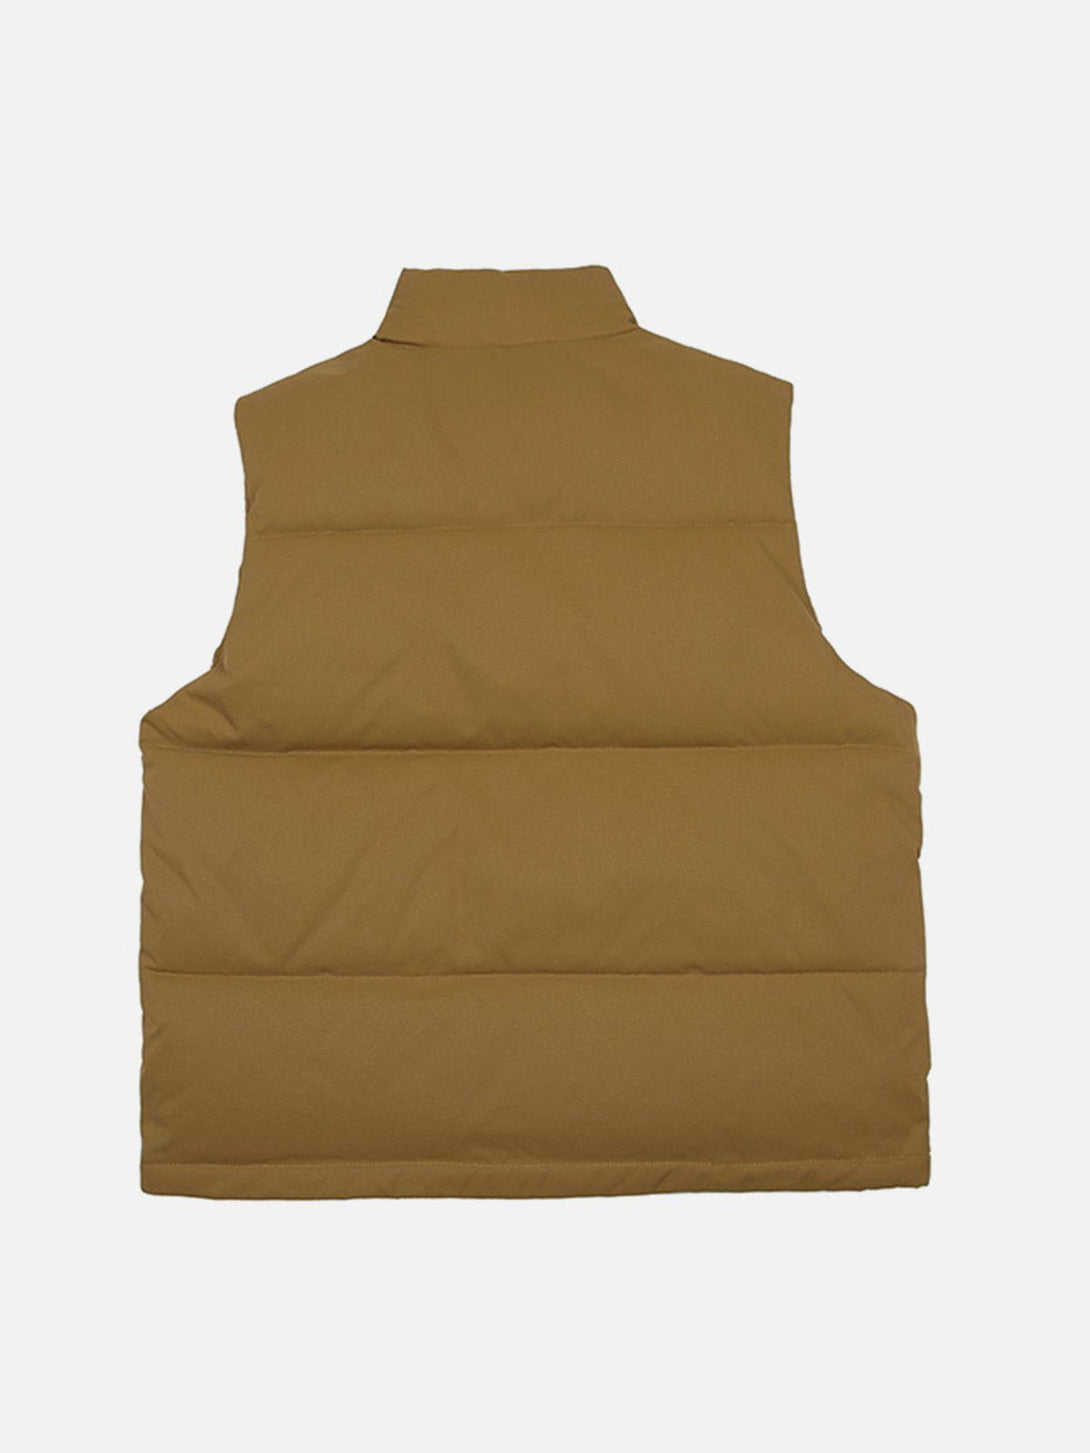 Levefly - Function Button Gilet - Streetwear Fashion - levefly.com